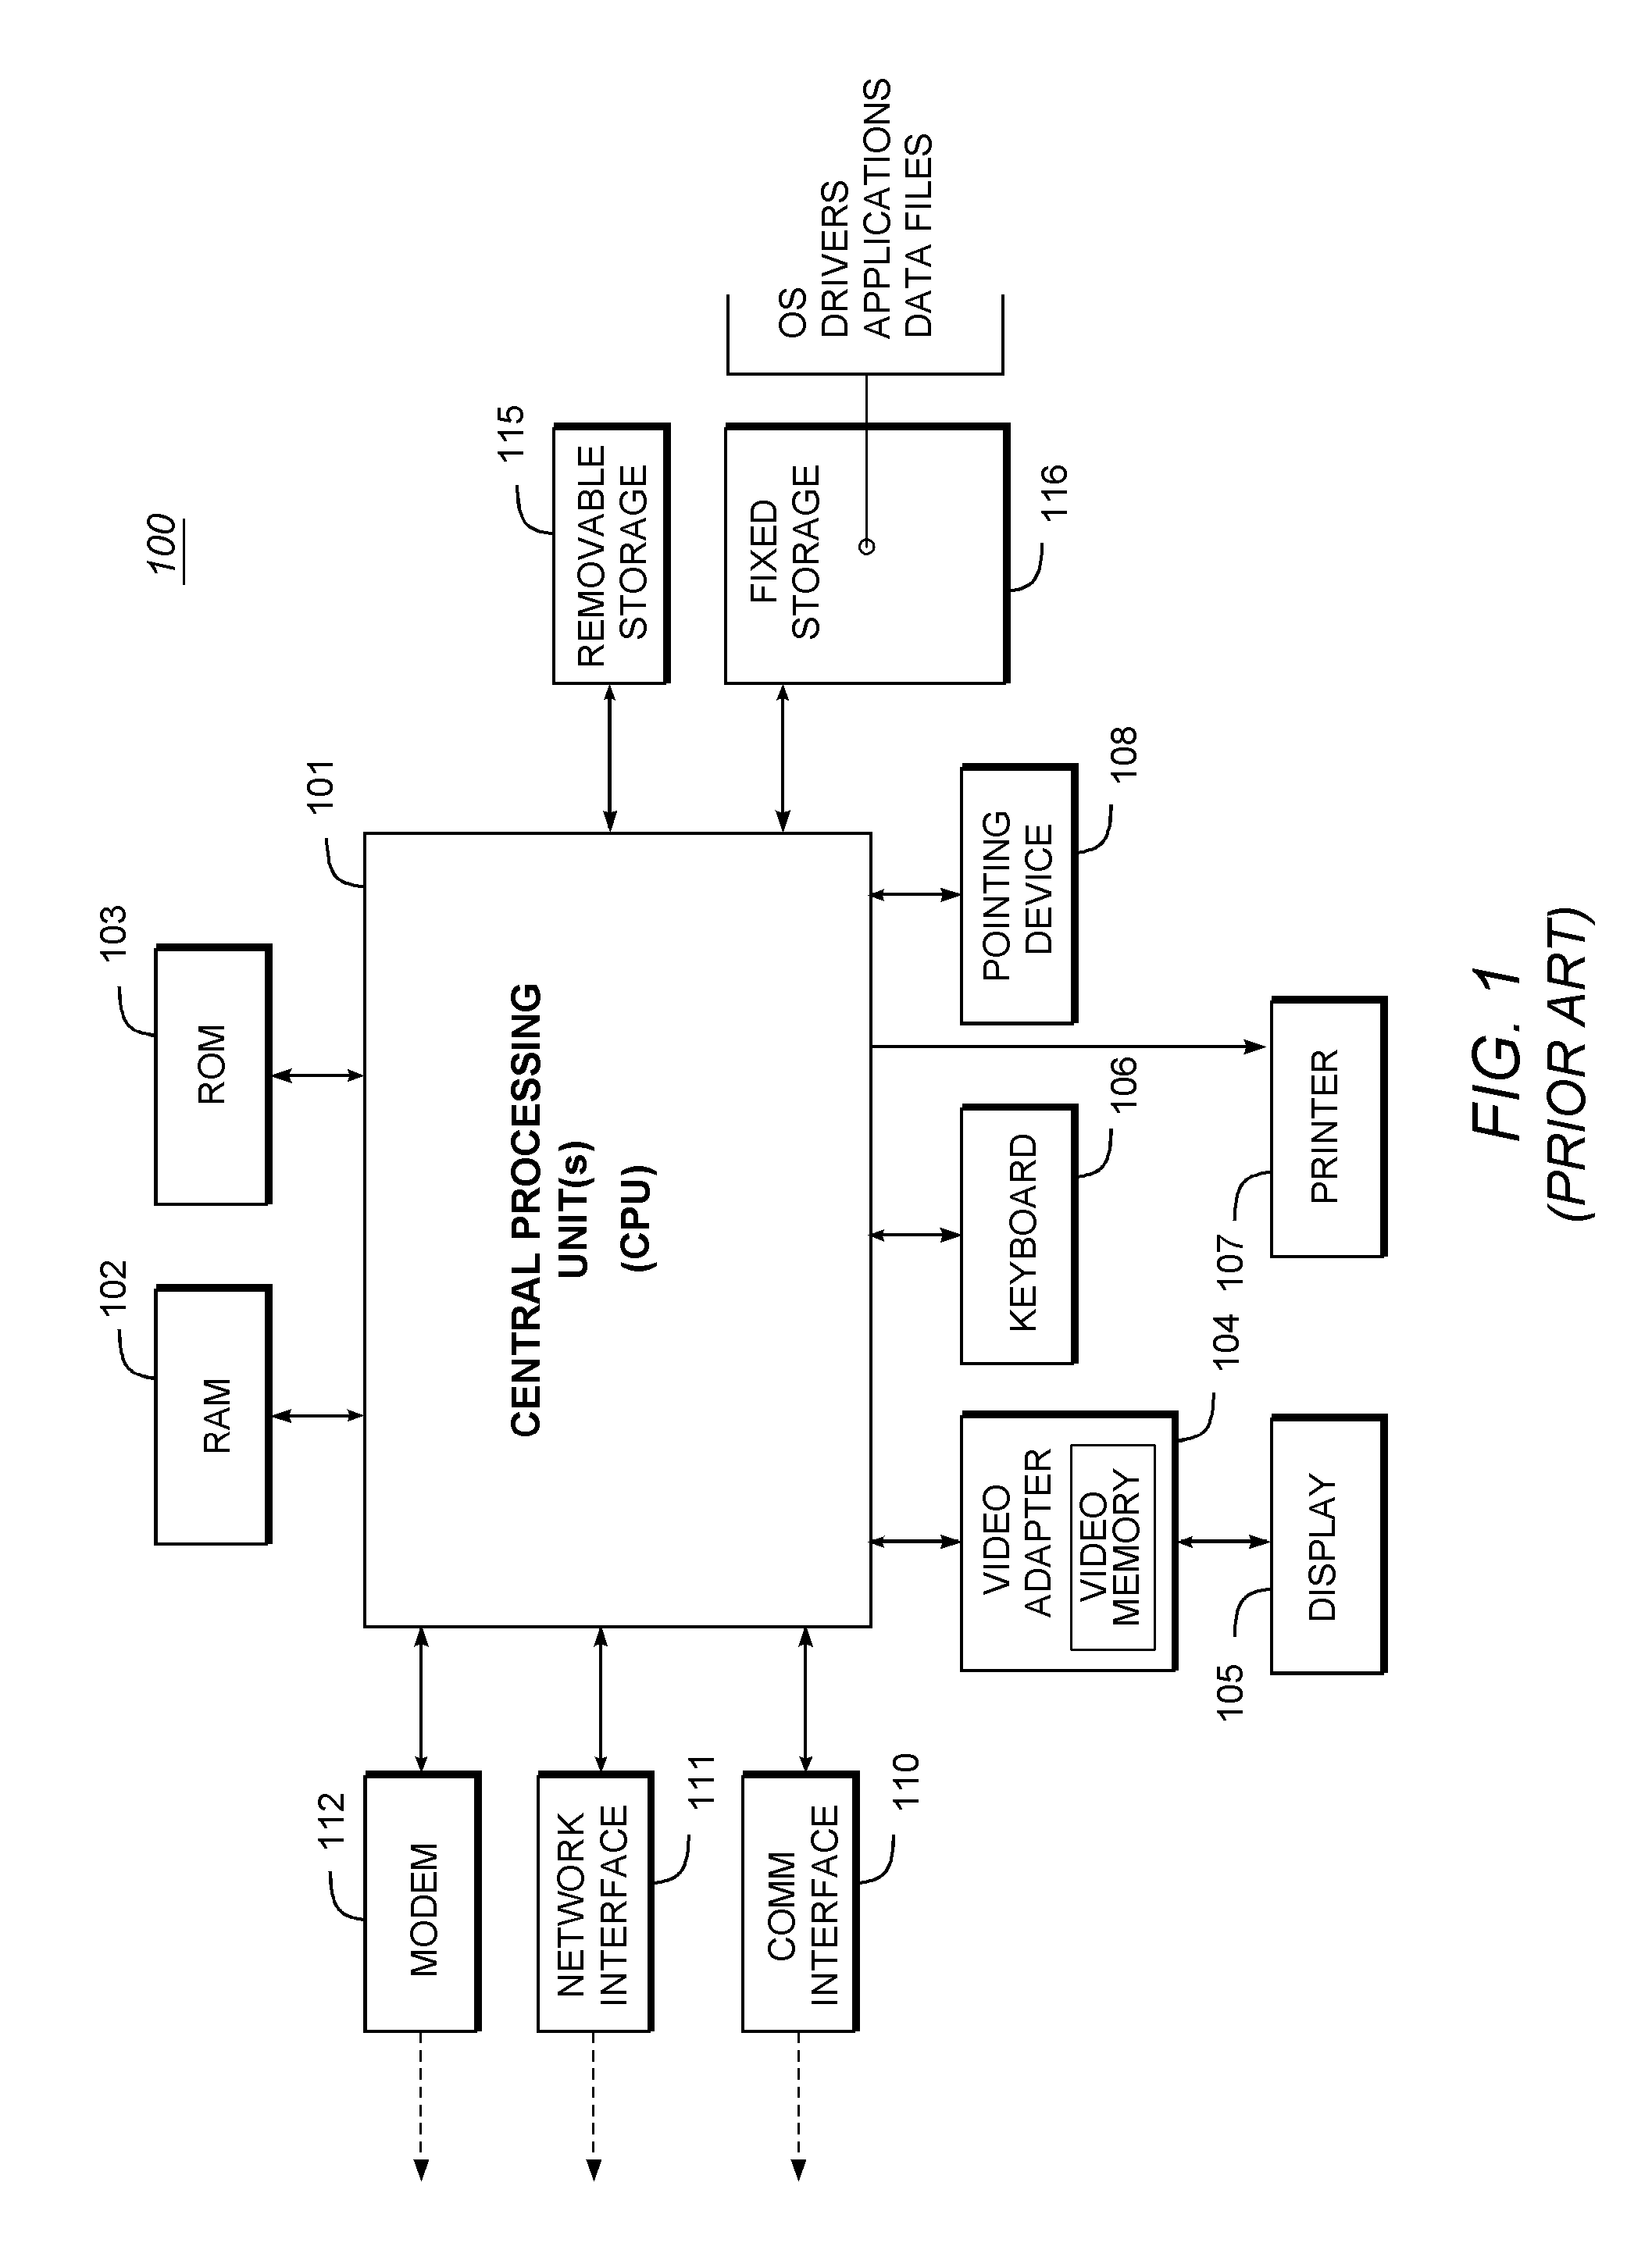 Security System with Methodology for Defending Against Security Breaches of Peripheral Devices